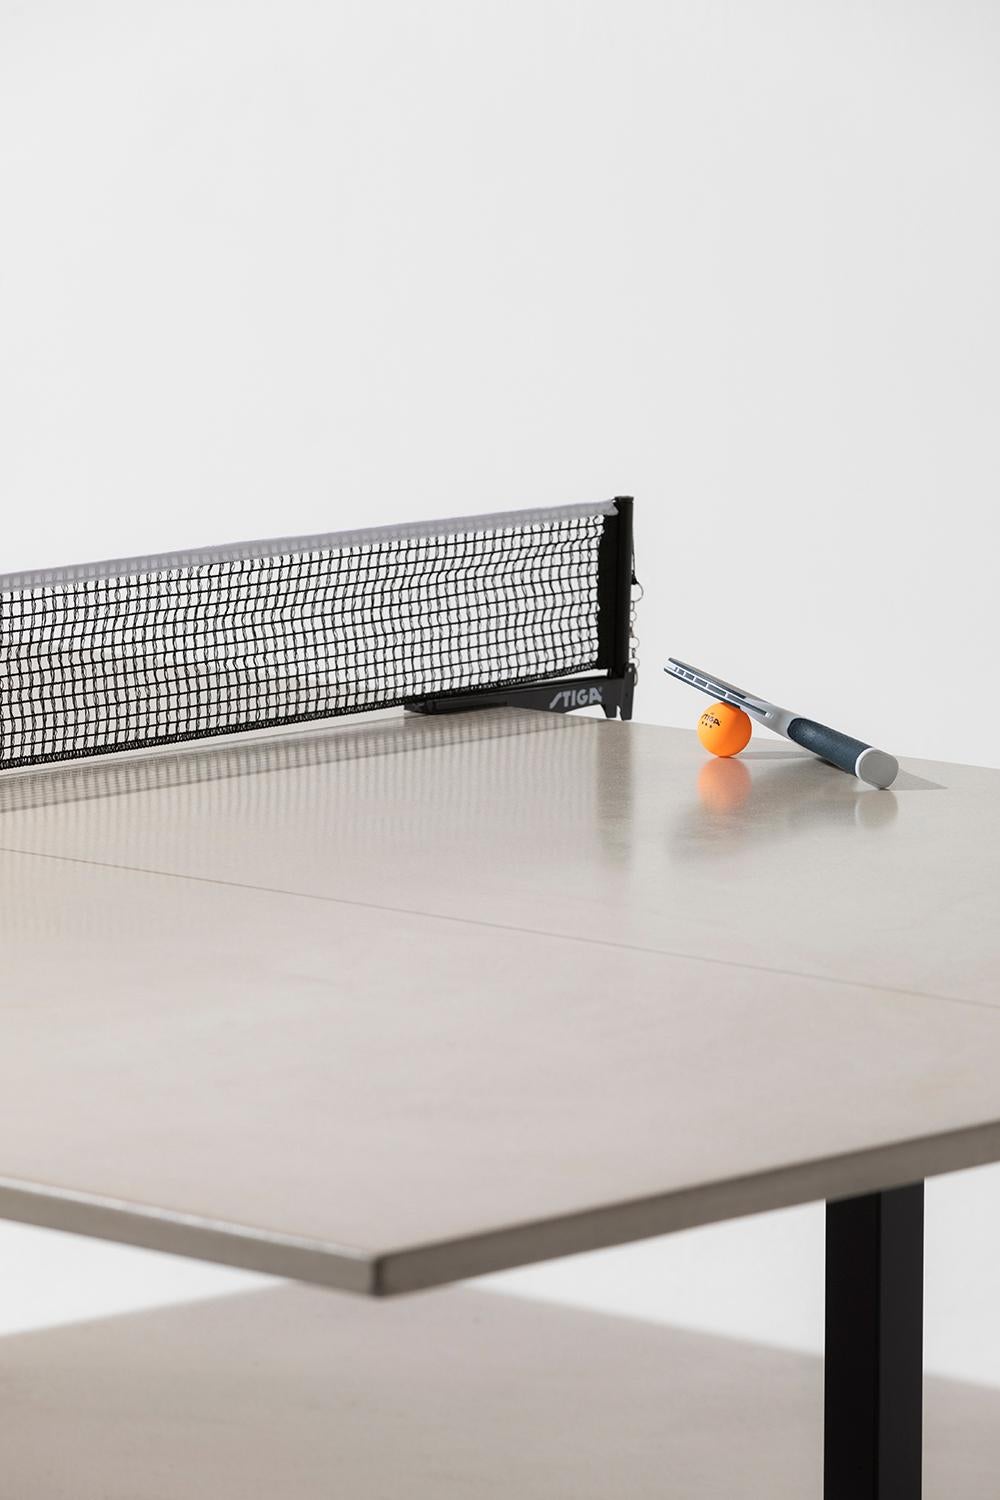 stainless steel ping pong table